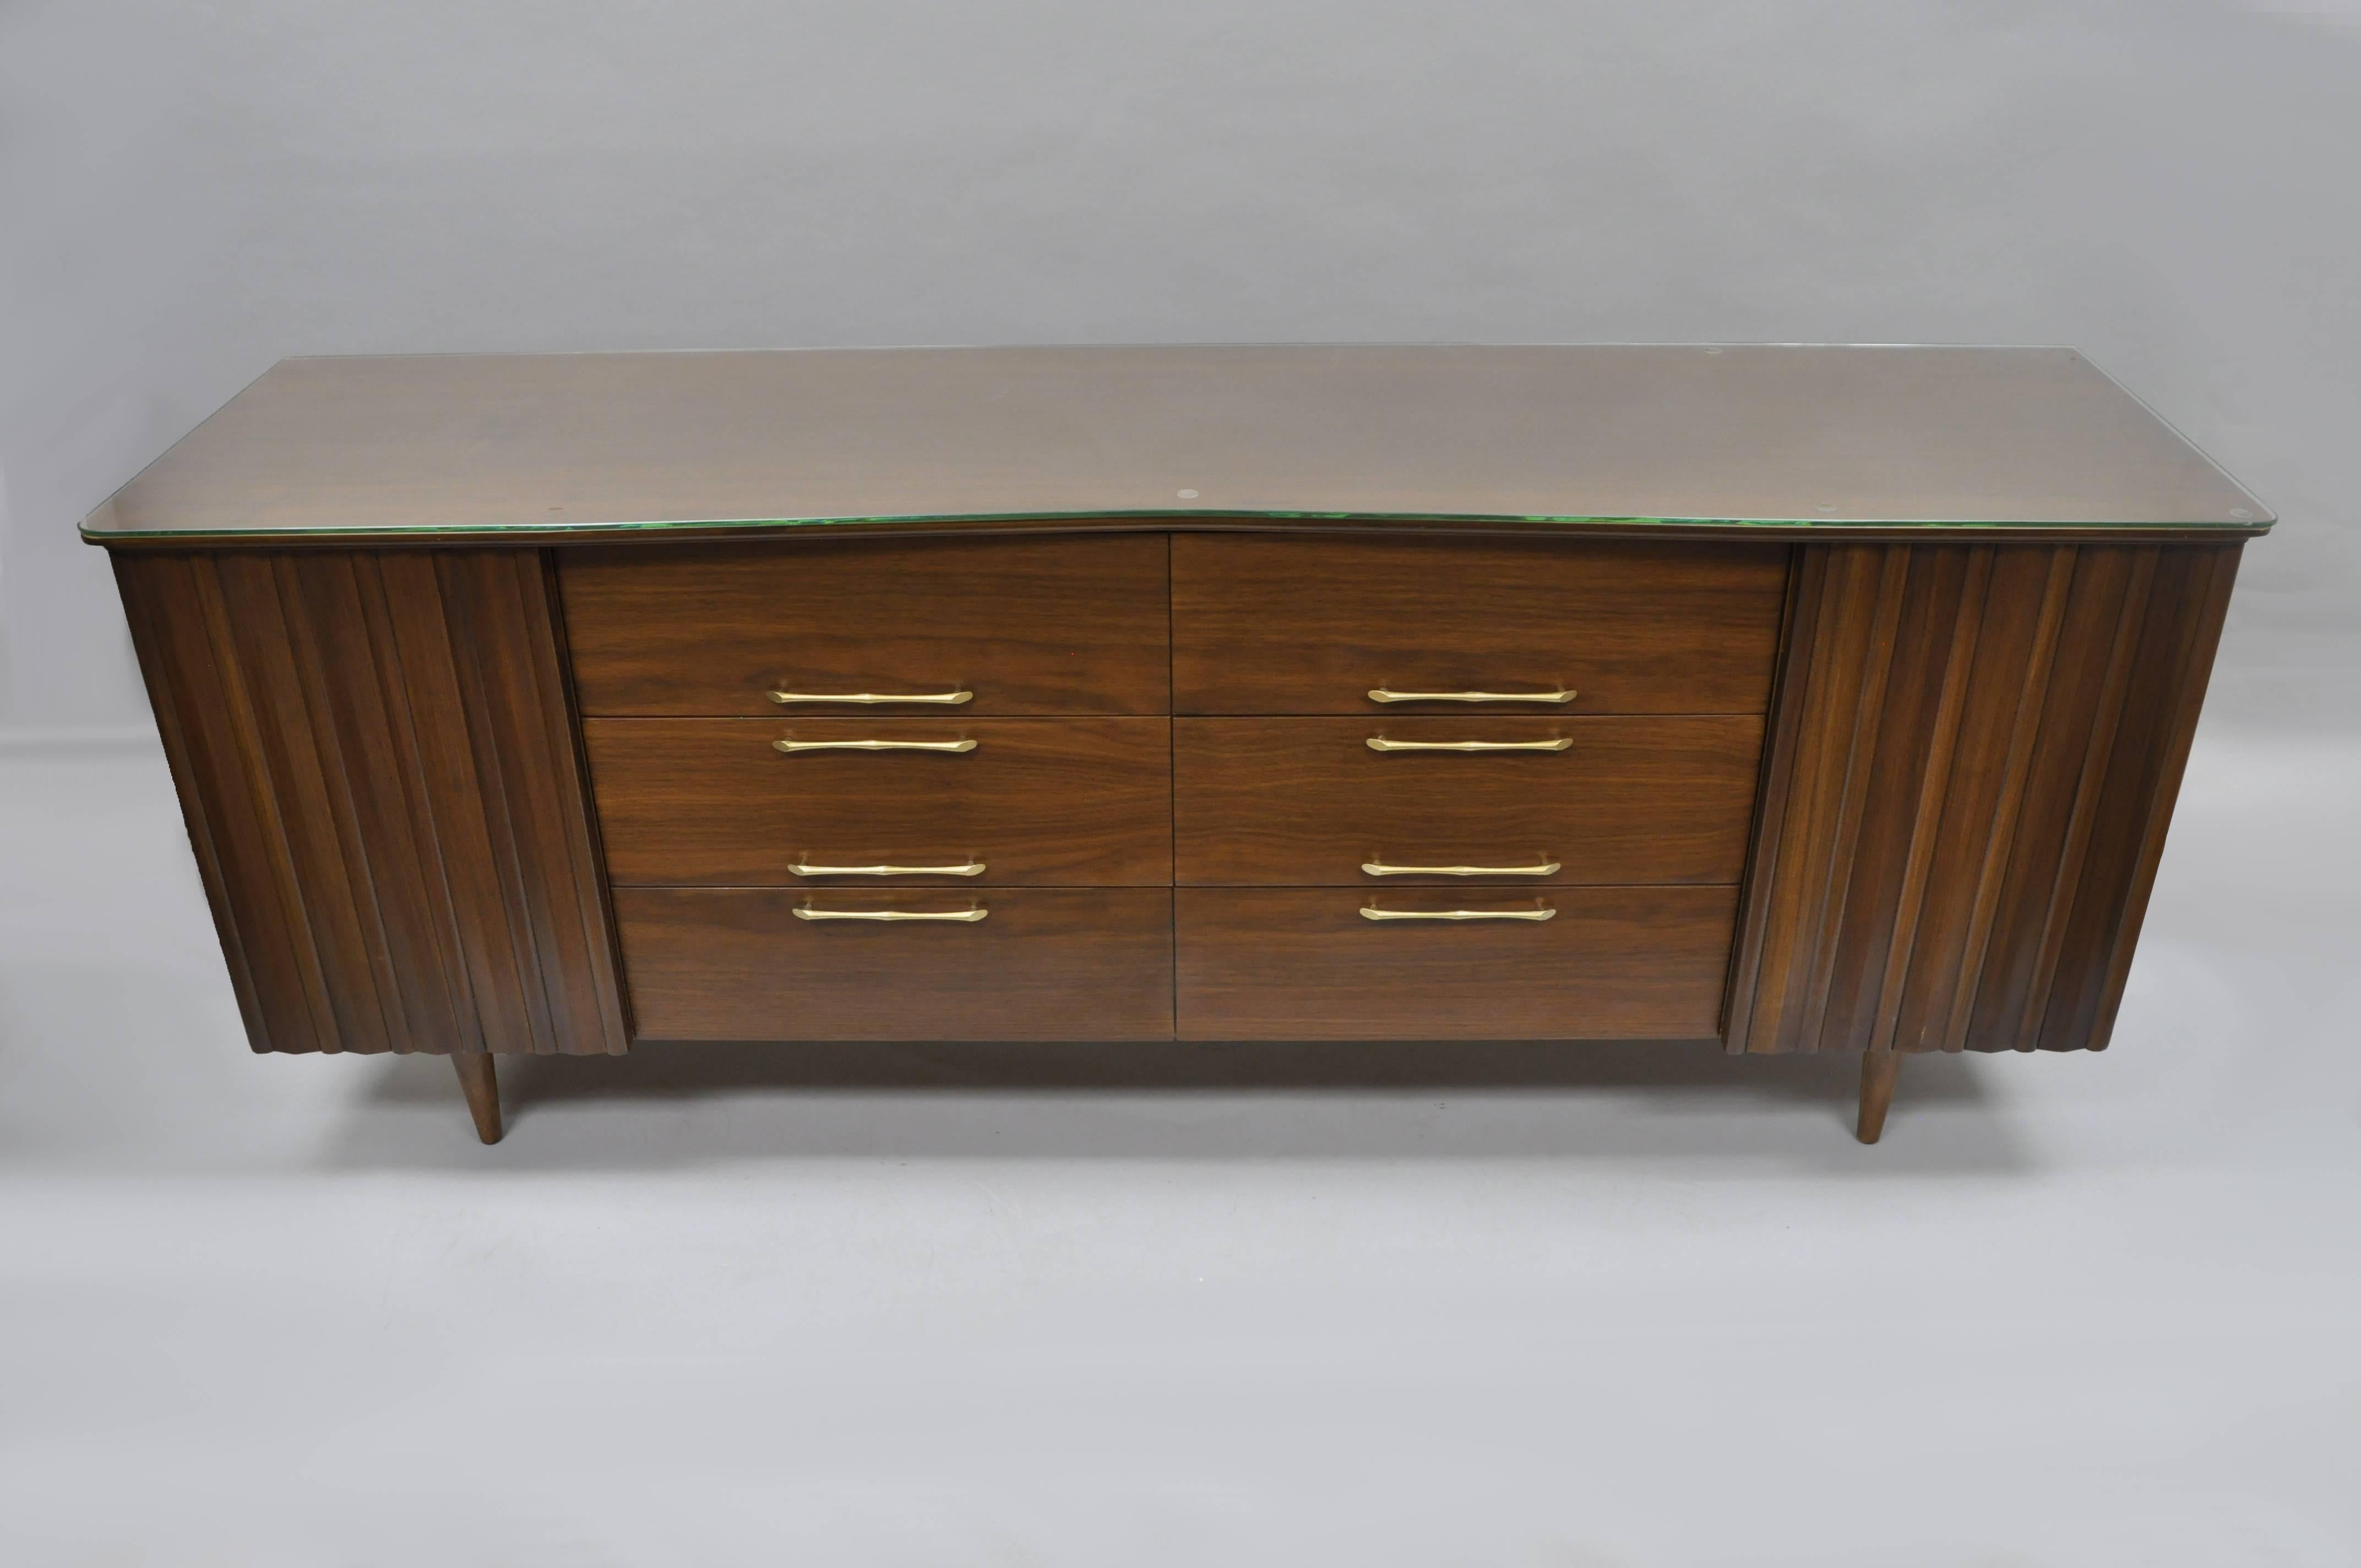 Superb Vintage midcentury American modern walnut long dresser. Original owners had dresser professionally refinished inside and out with custom angled glass top added. Item features two sculptural walnut doors, 12 dovetailed drawers, shaped top,